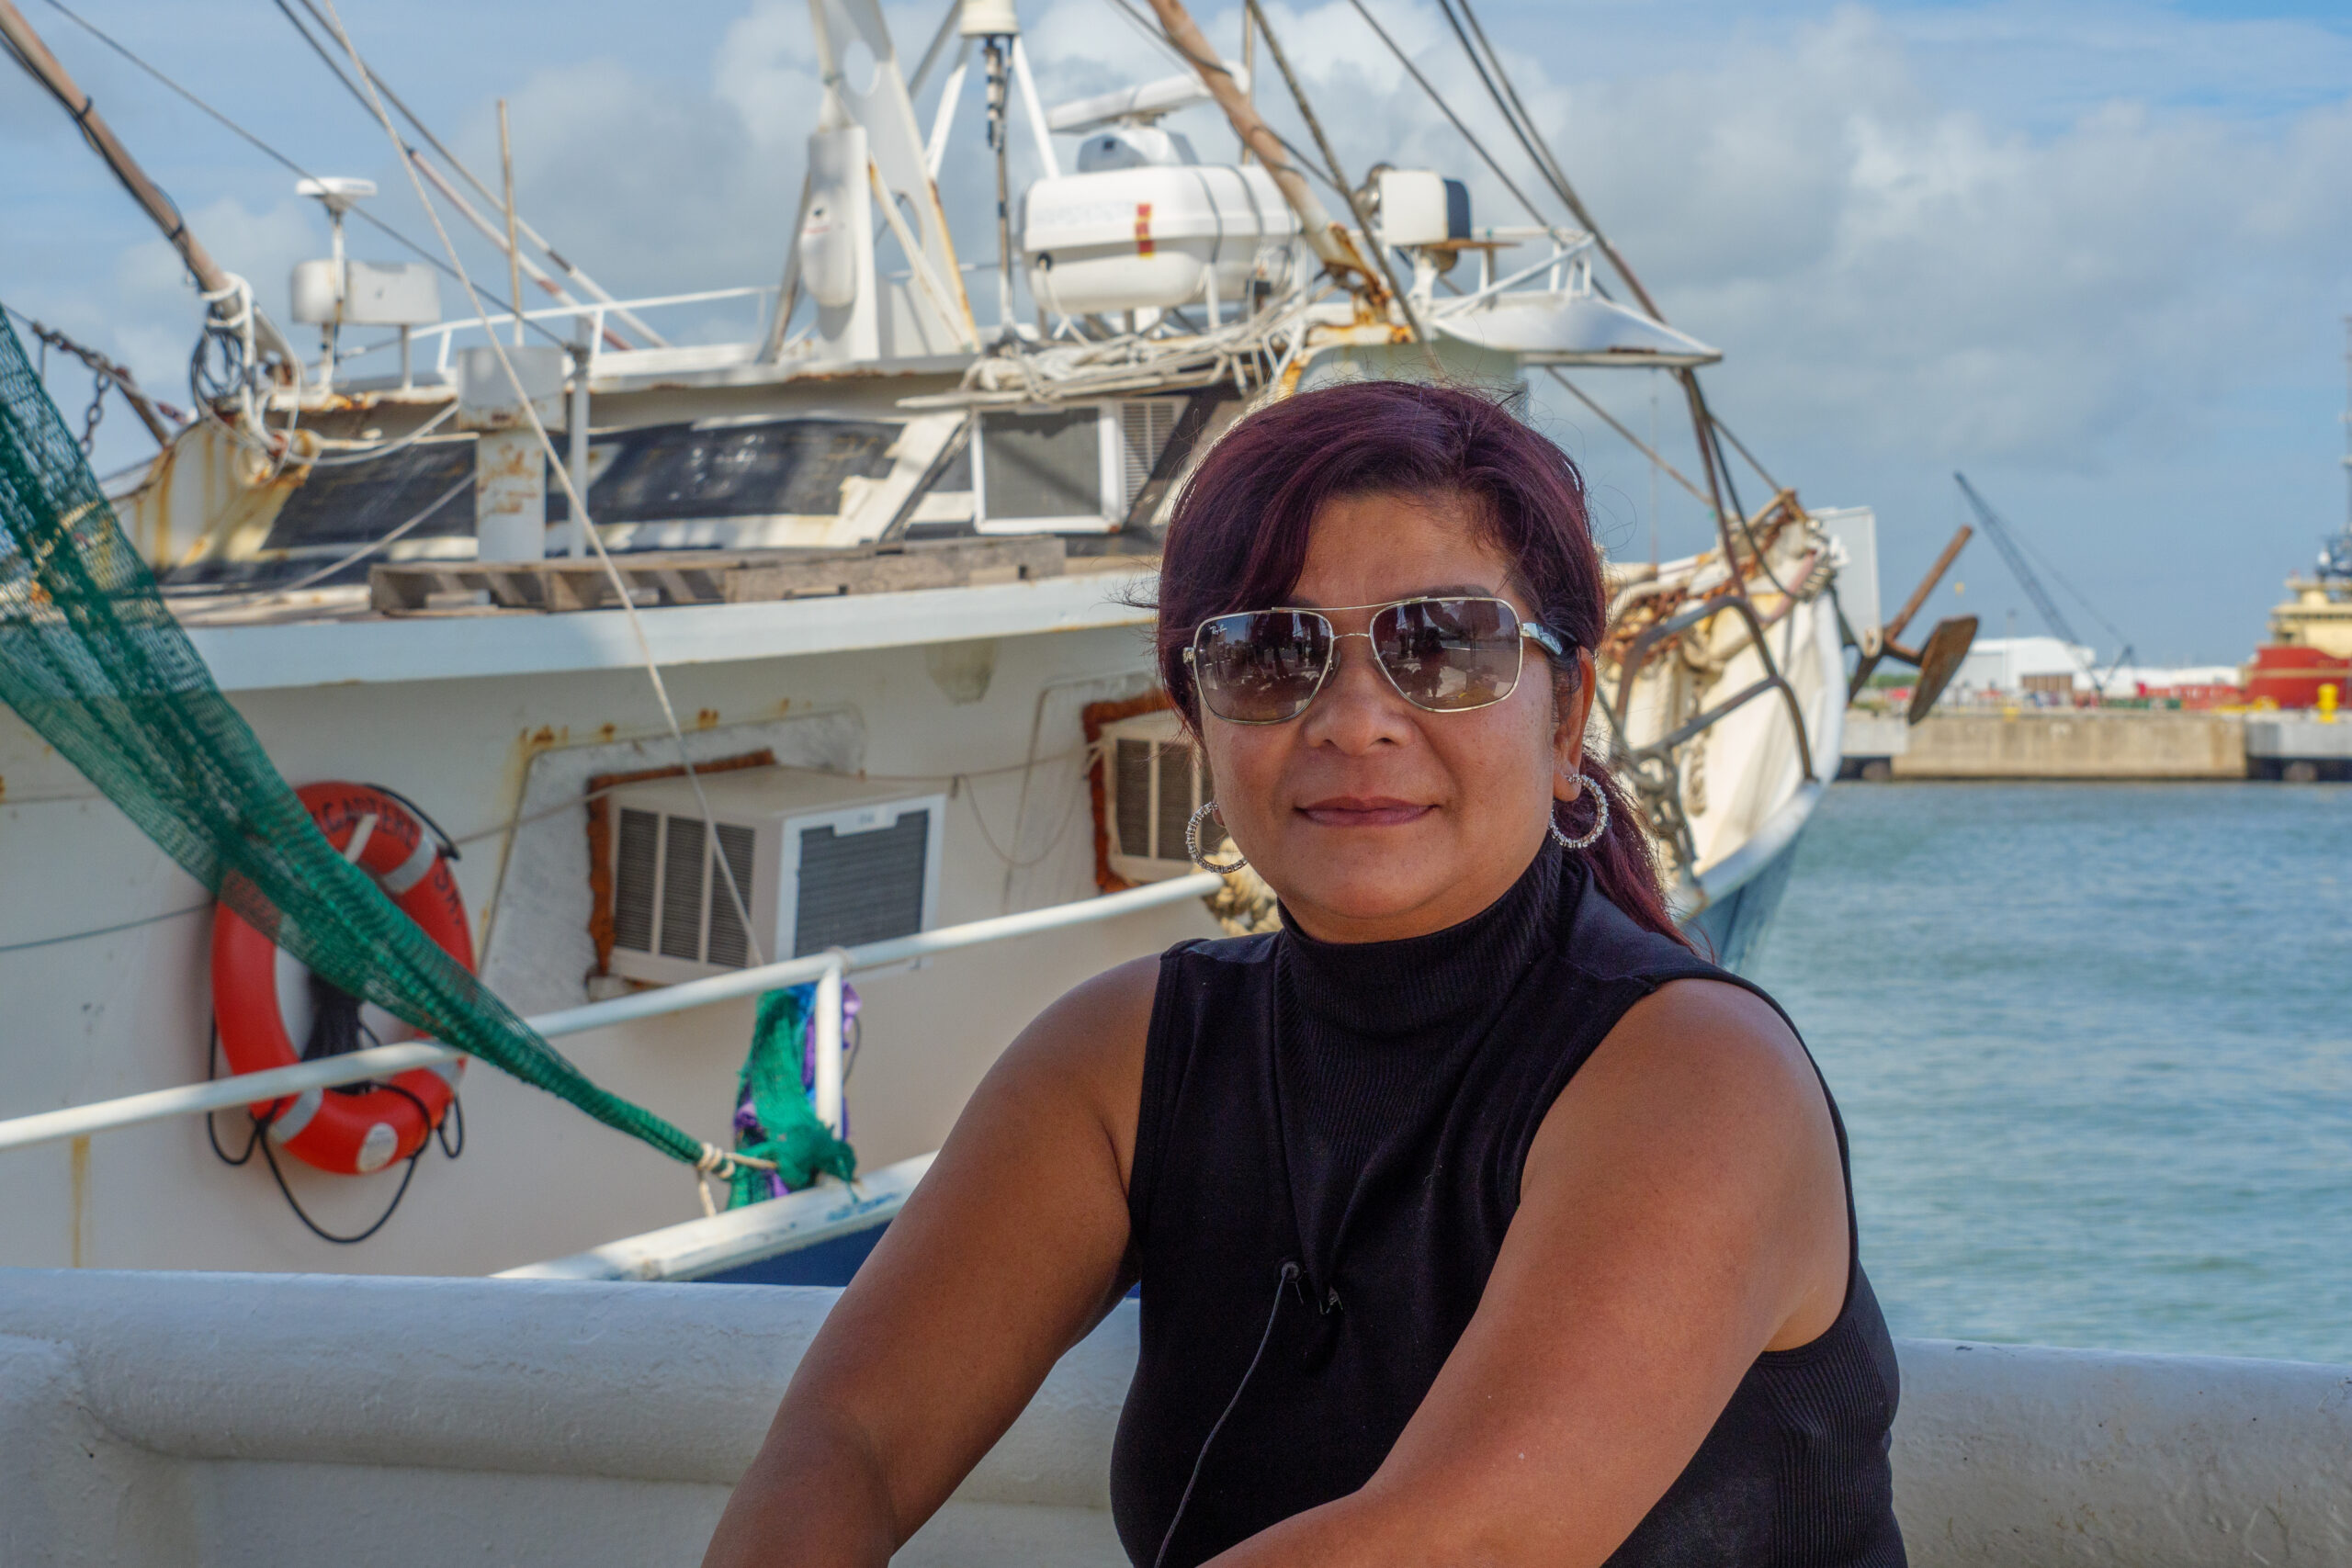 A Vietnamese in sunglasses with short black hair looks at the camera, a shrimp boat floating in the background behind her under a partly cloudy sky.